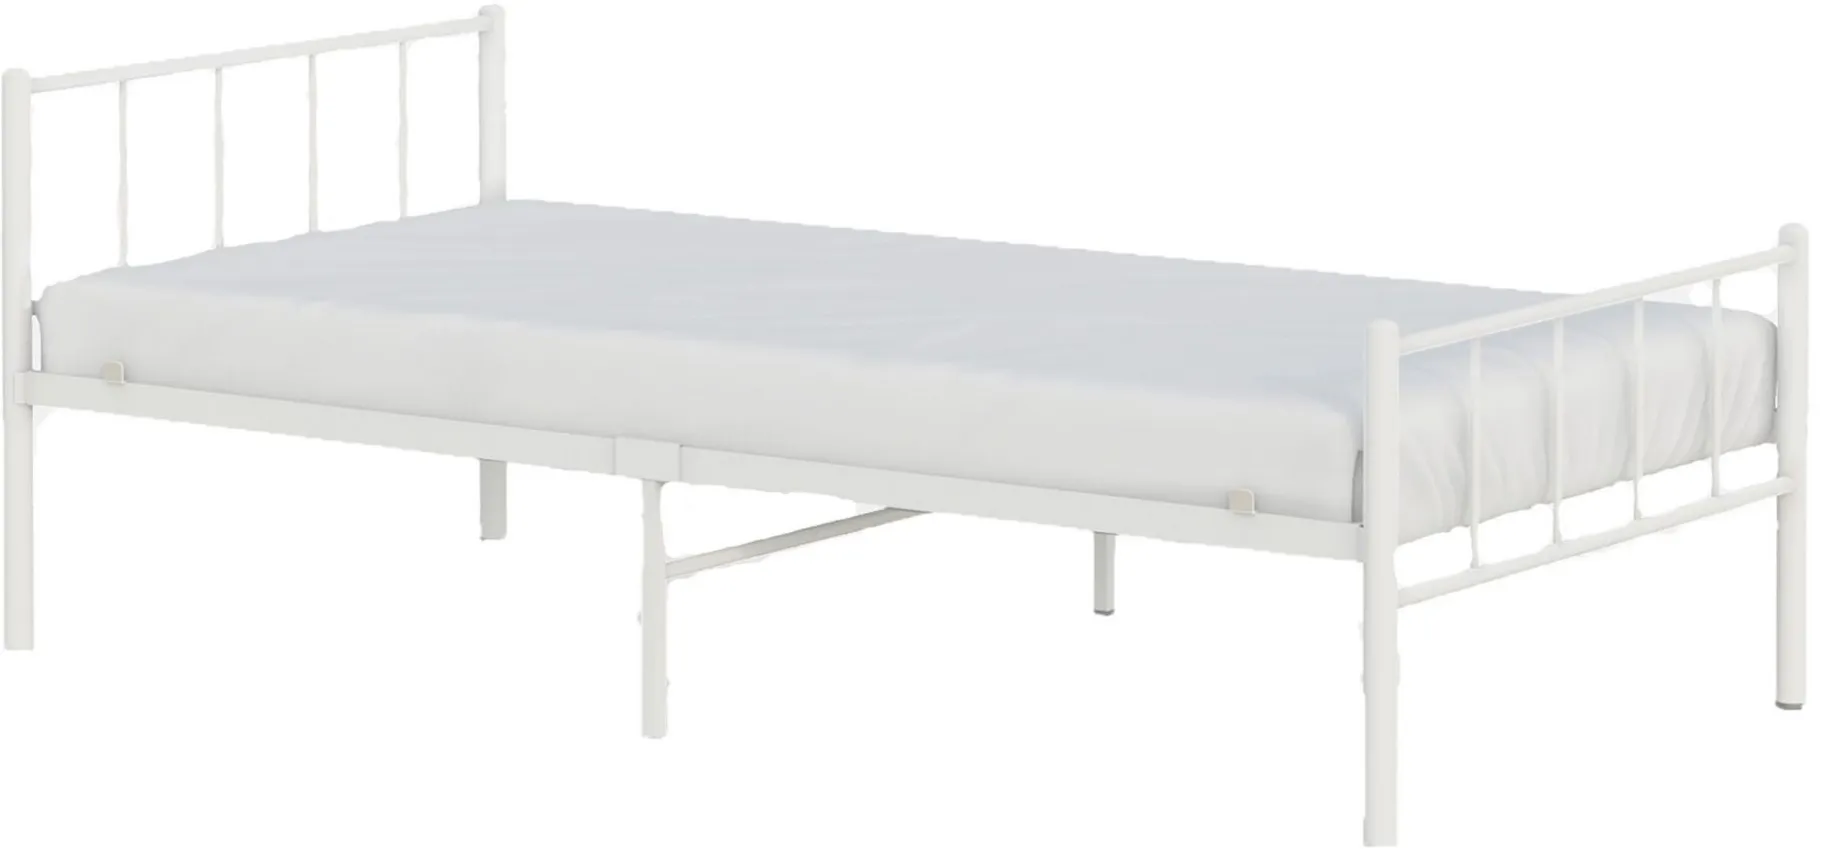 Austin Metal Twin Bed in White by BK Furniture